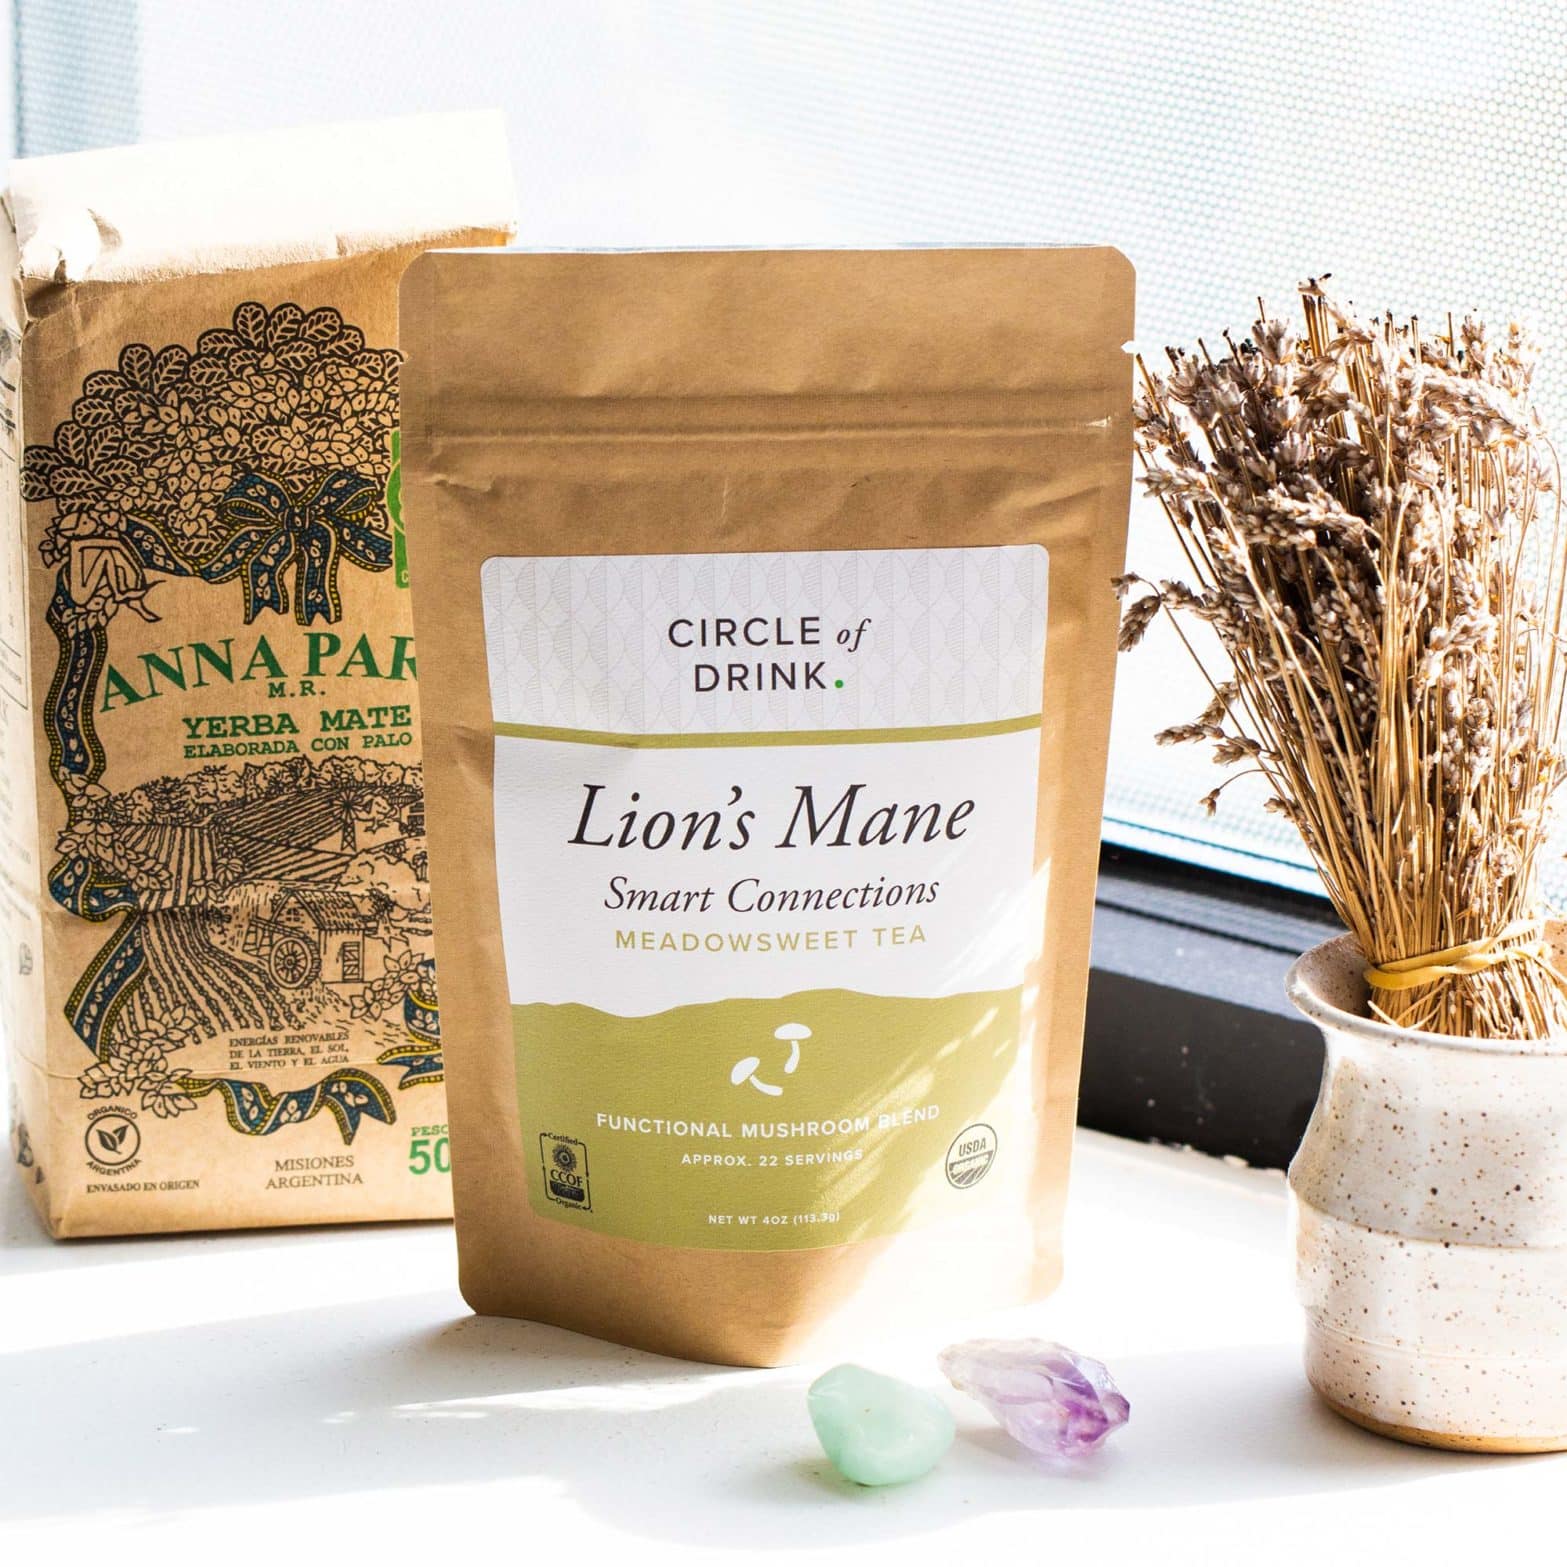 Anna Park Yerba Mate with Lion's Mane Smart Connections Tea - 2 packs